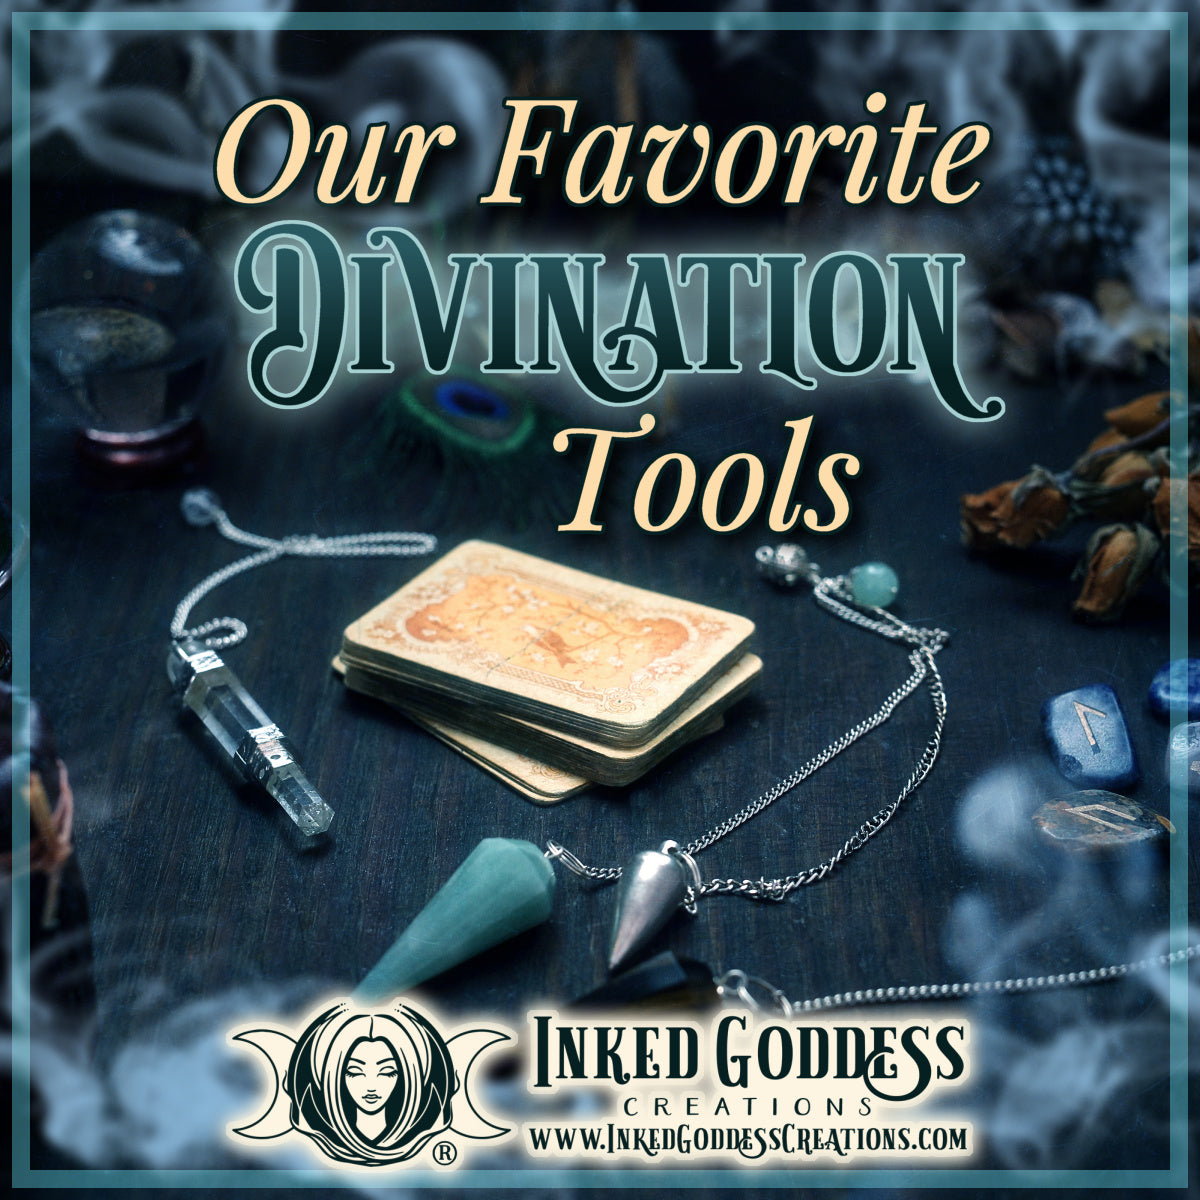 Our Favorite Divination Tools